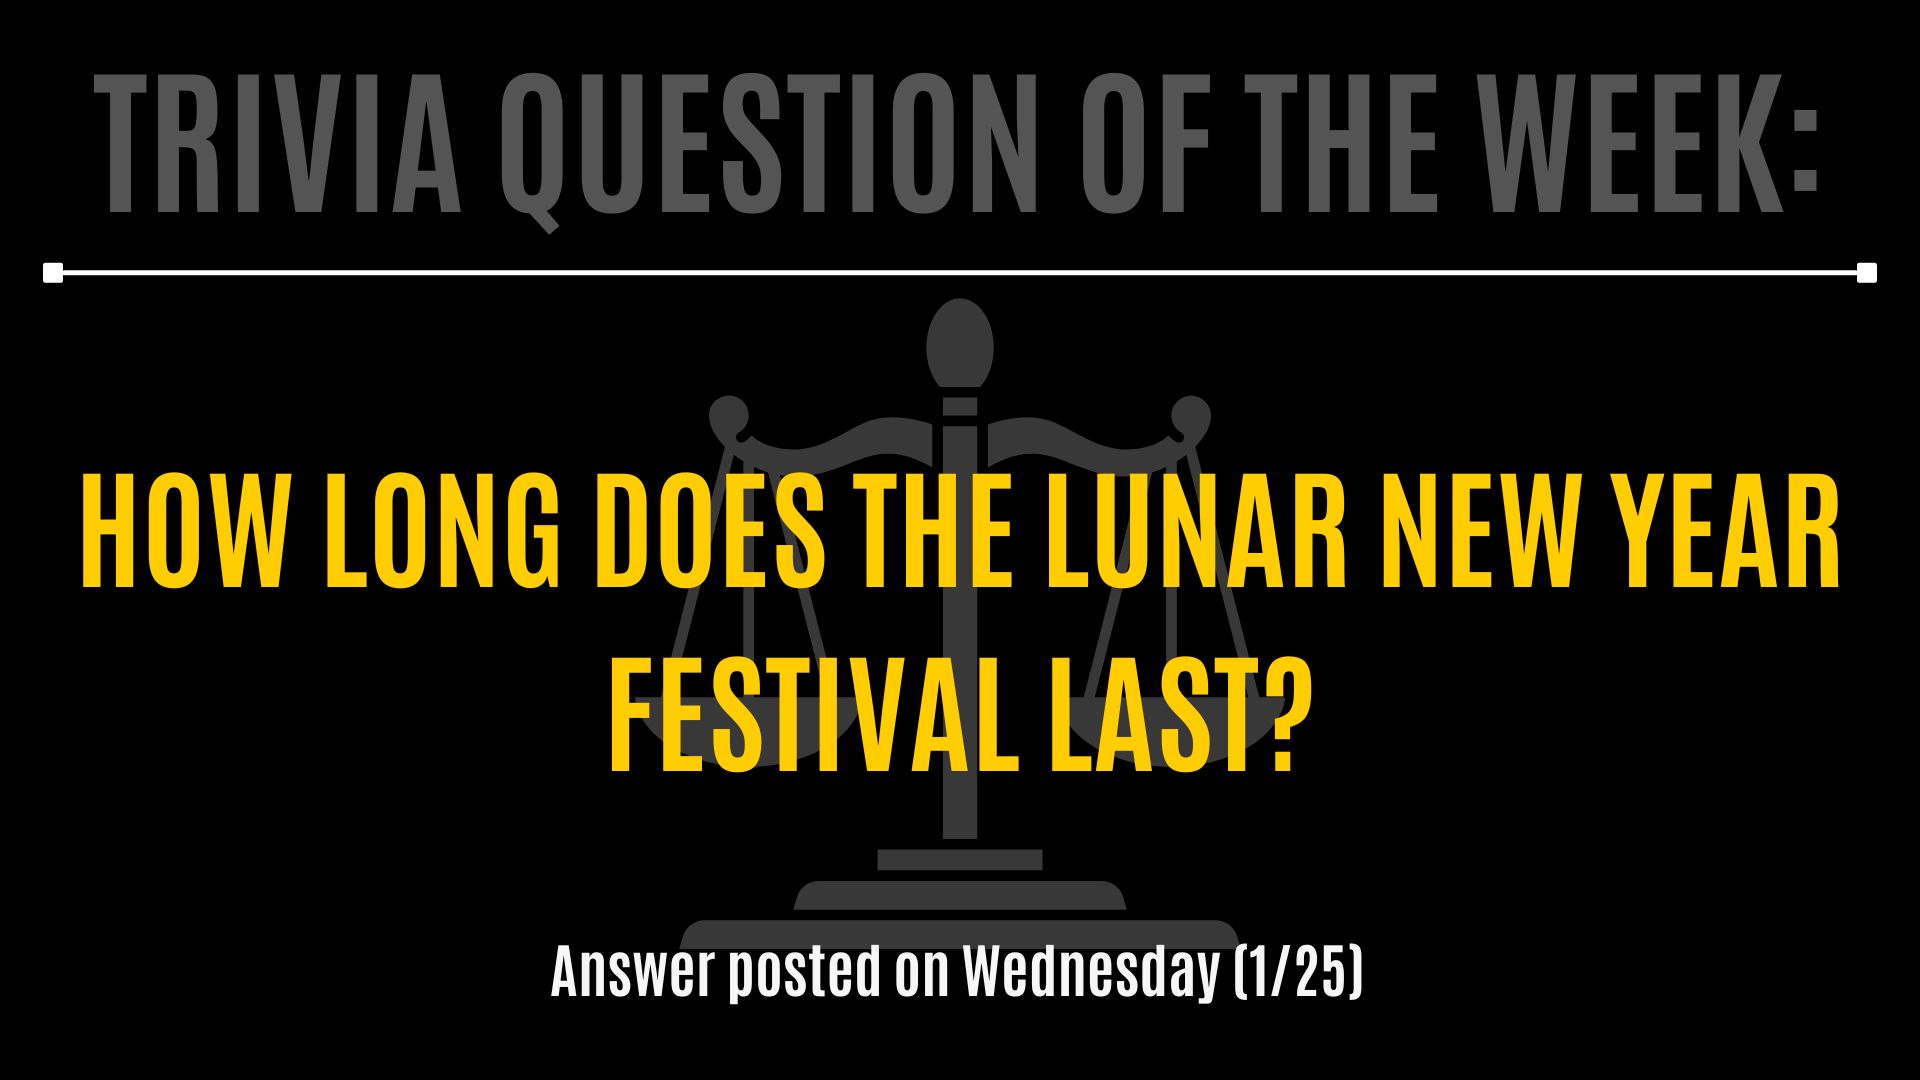 Trivia question of the week: How long does the LUNAR new year festival last? Answer posted on Wednesday (1/25)